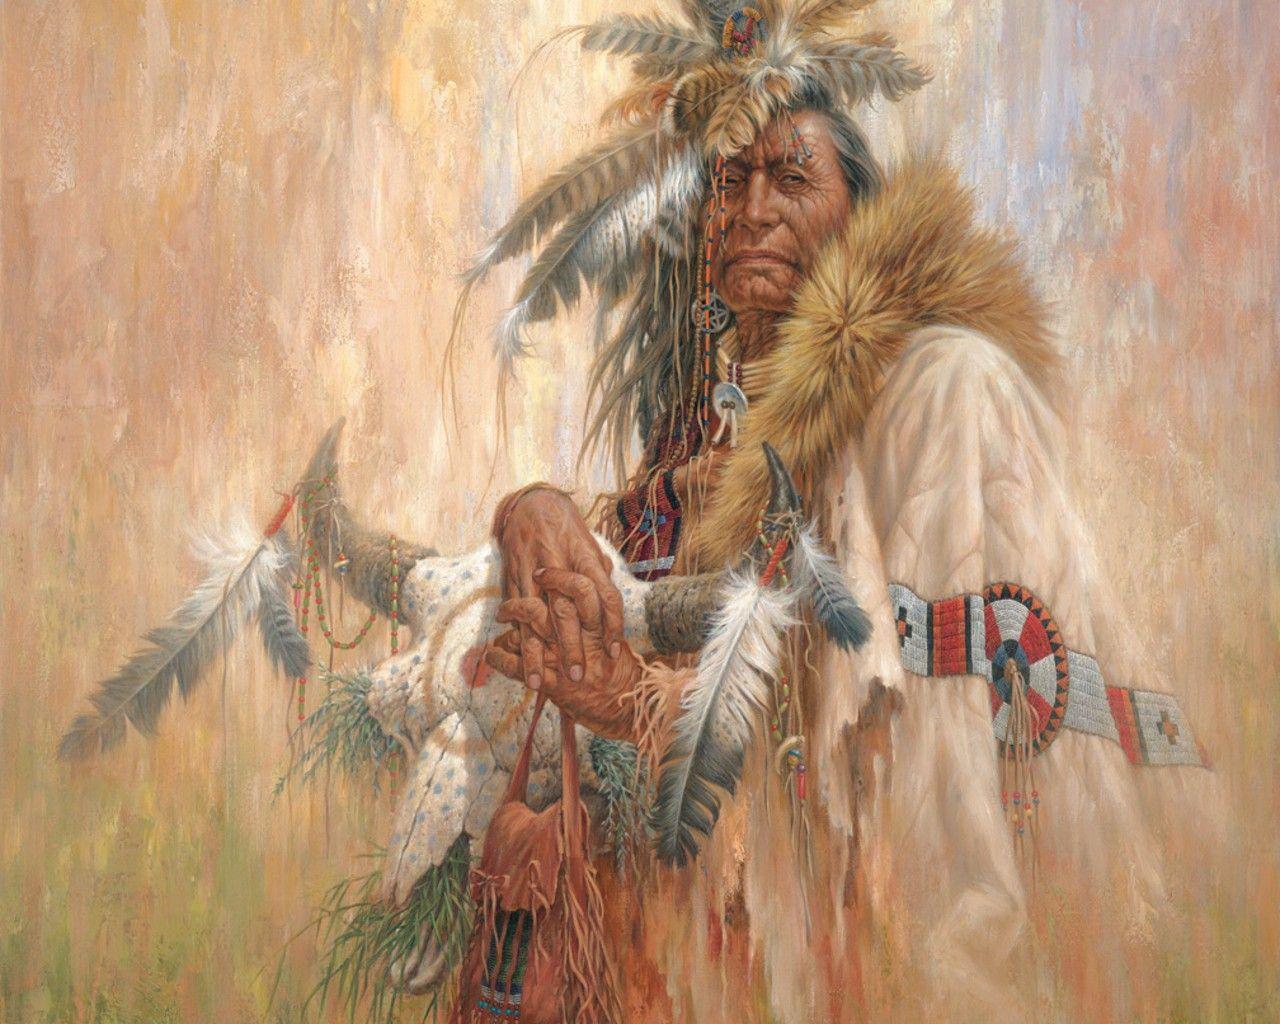 Red Indian Wallpaper